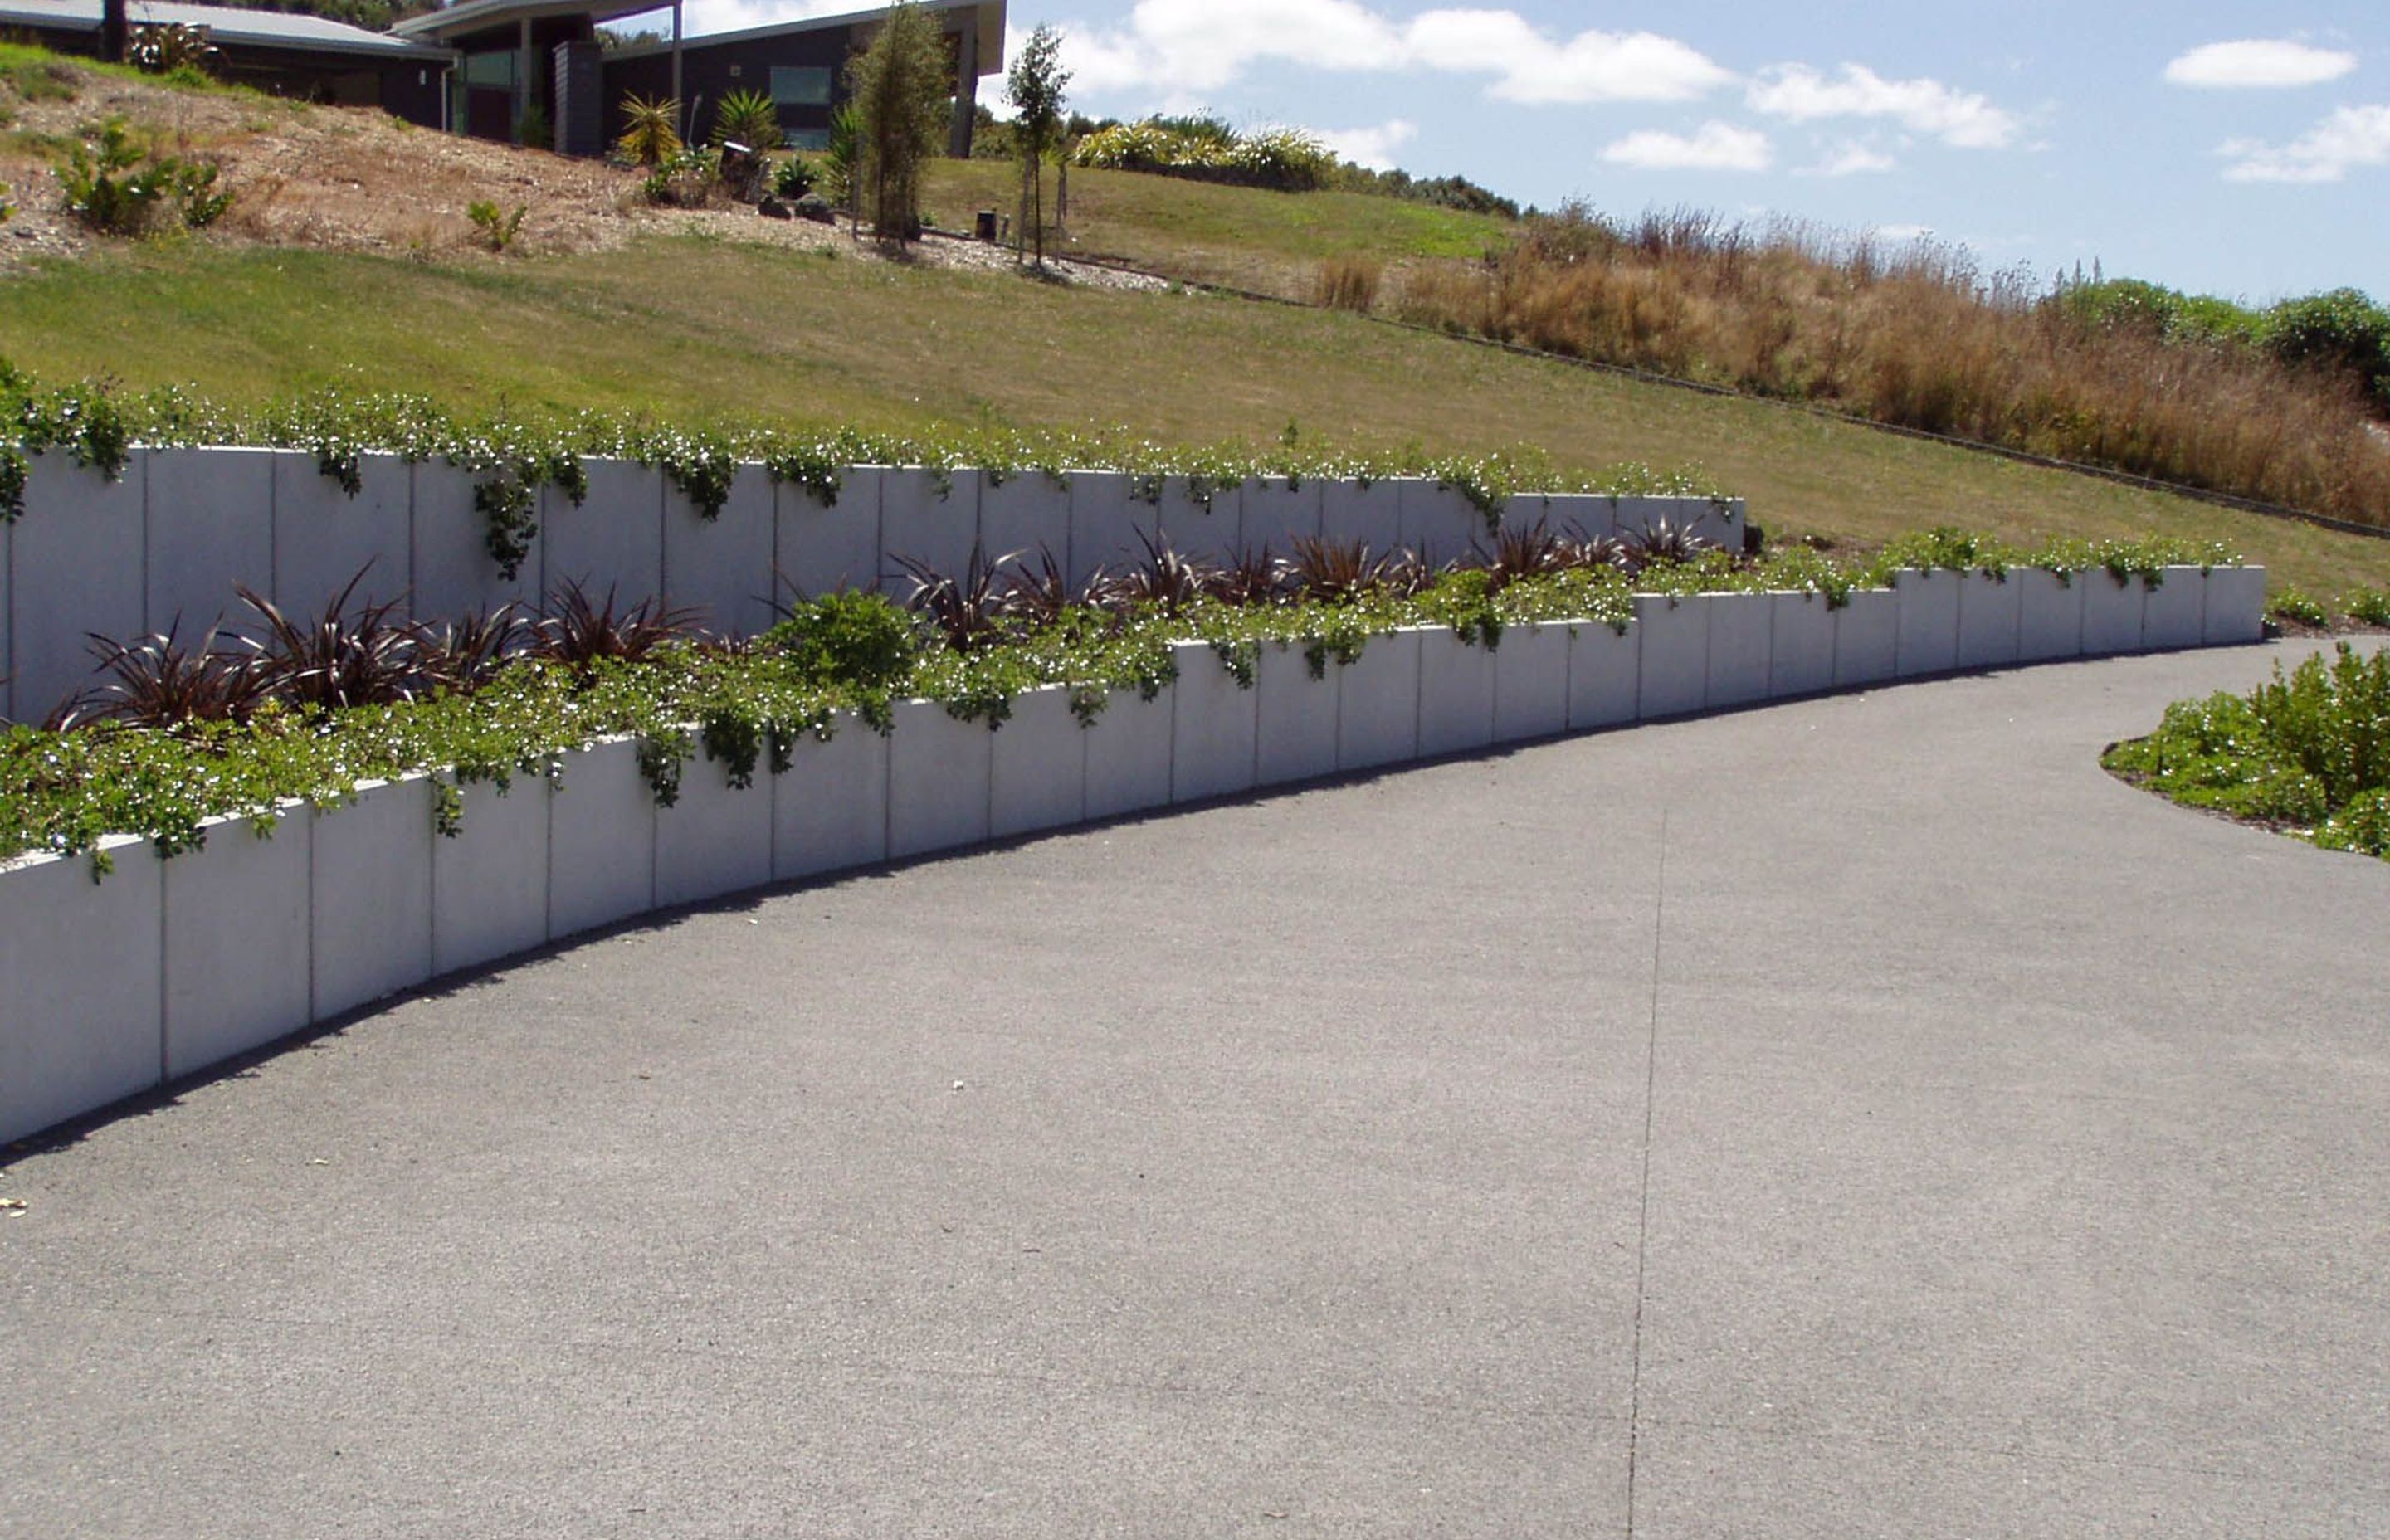 The Lusit Retaining Wall system is a precast concrete engineered wall suitable for a wide variety of ground retention uses.